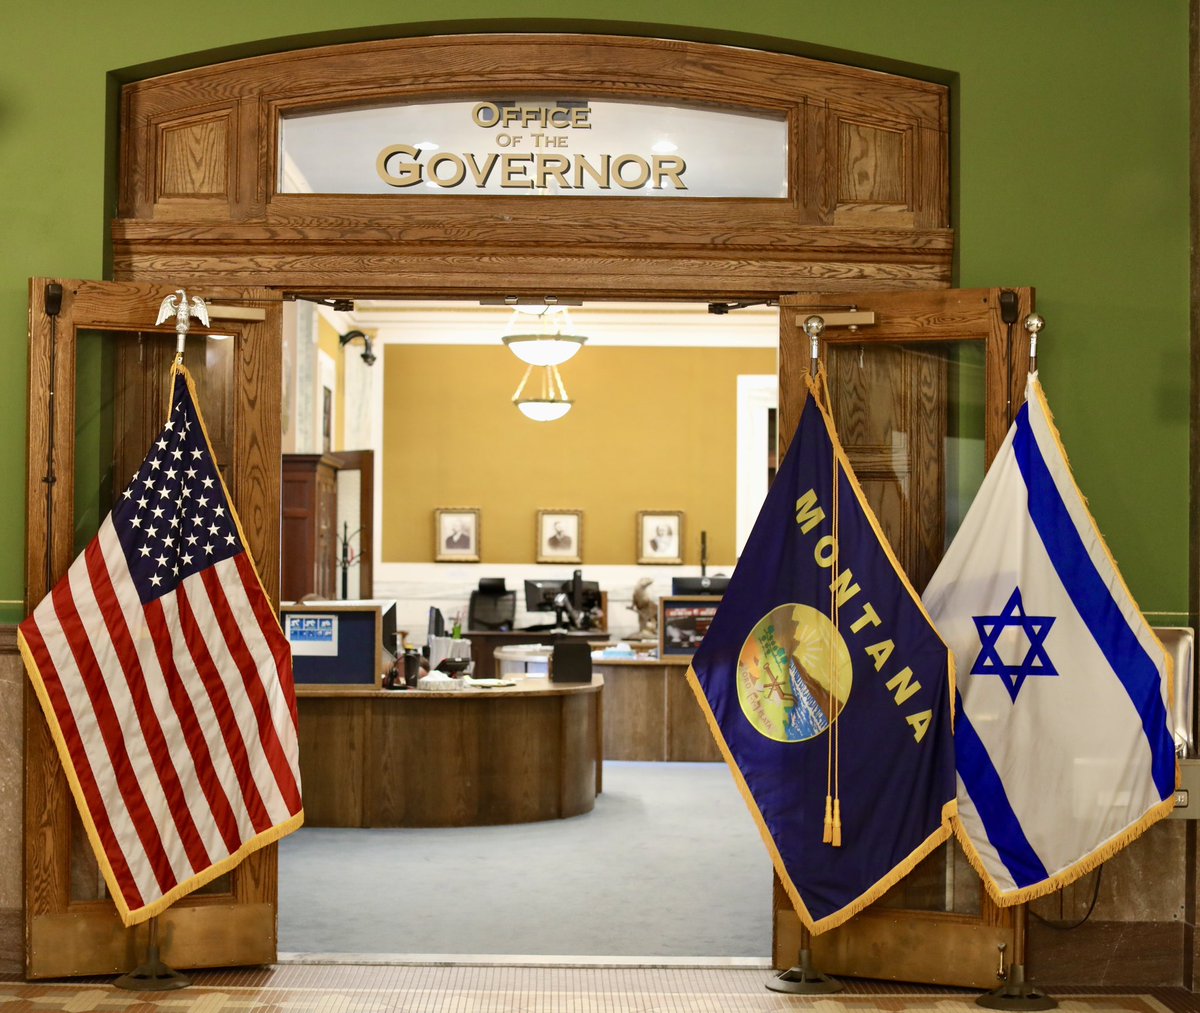 Today marks 6 months since brutal Hamas terrorists attacked Israel, and to this day, they continue to hold hostages, including Americans. Montana continues to stand with Israel. The Israeli flag will continue to stand outside my office until all hostages are home.